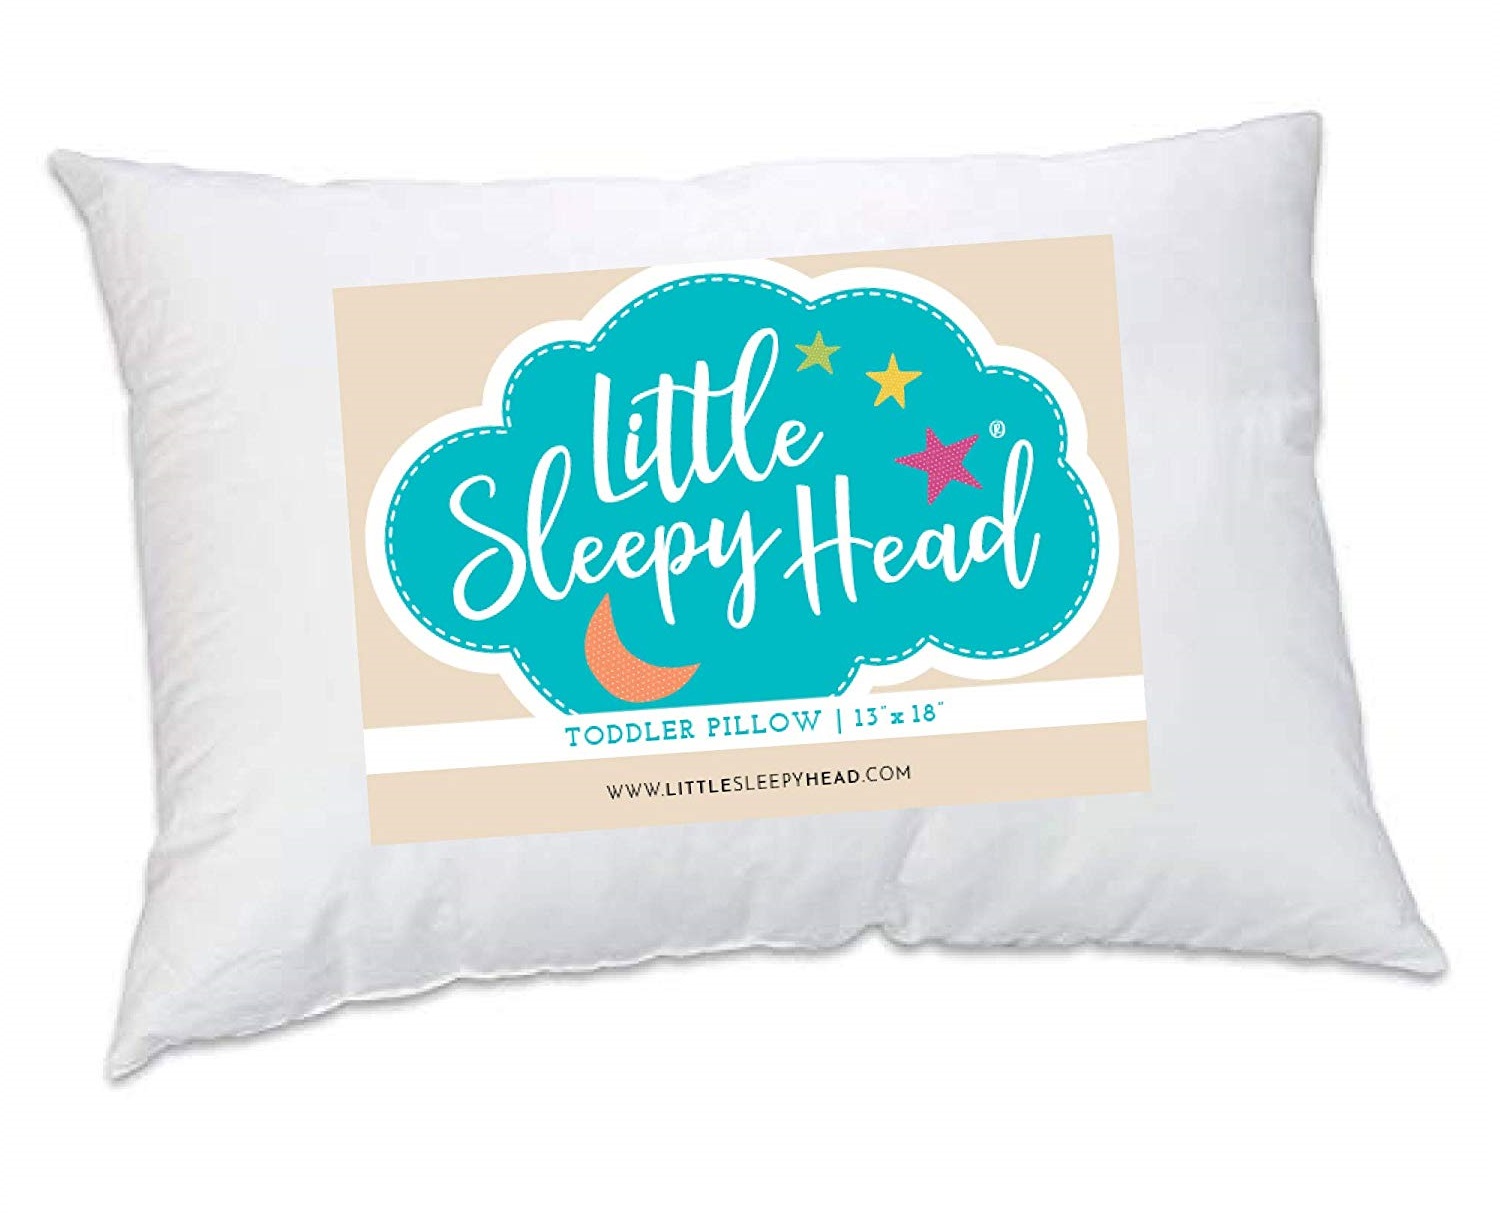 A Little Sleep Head pillow for toddlers